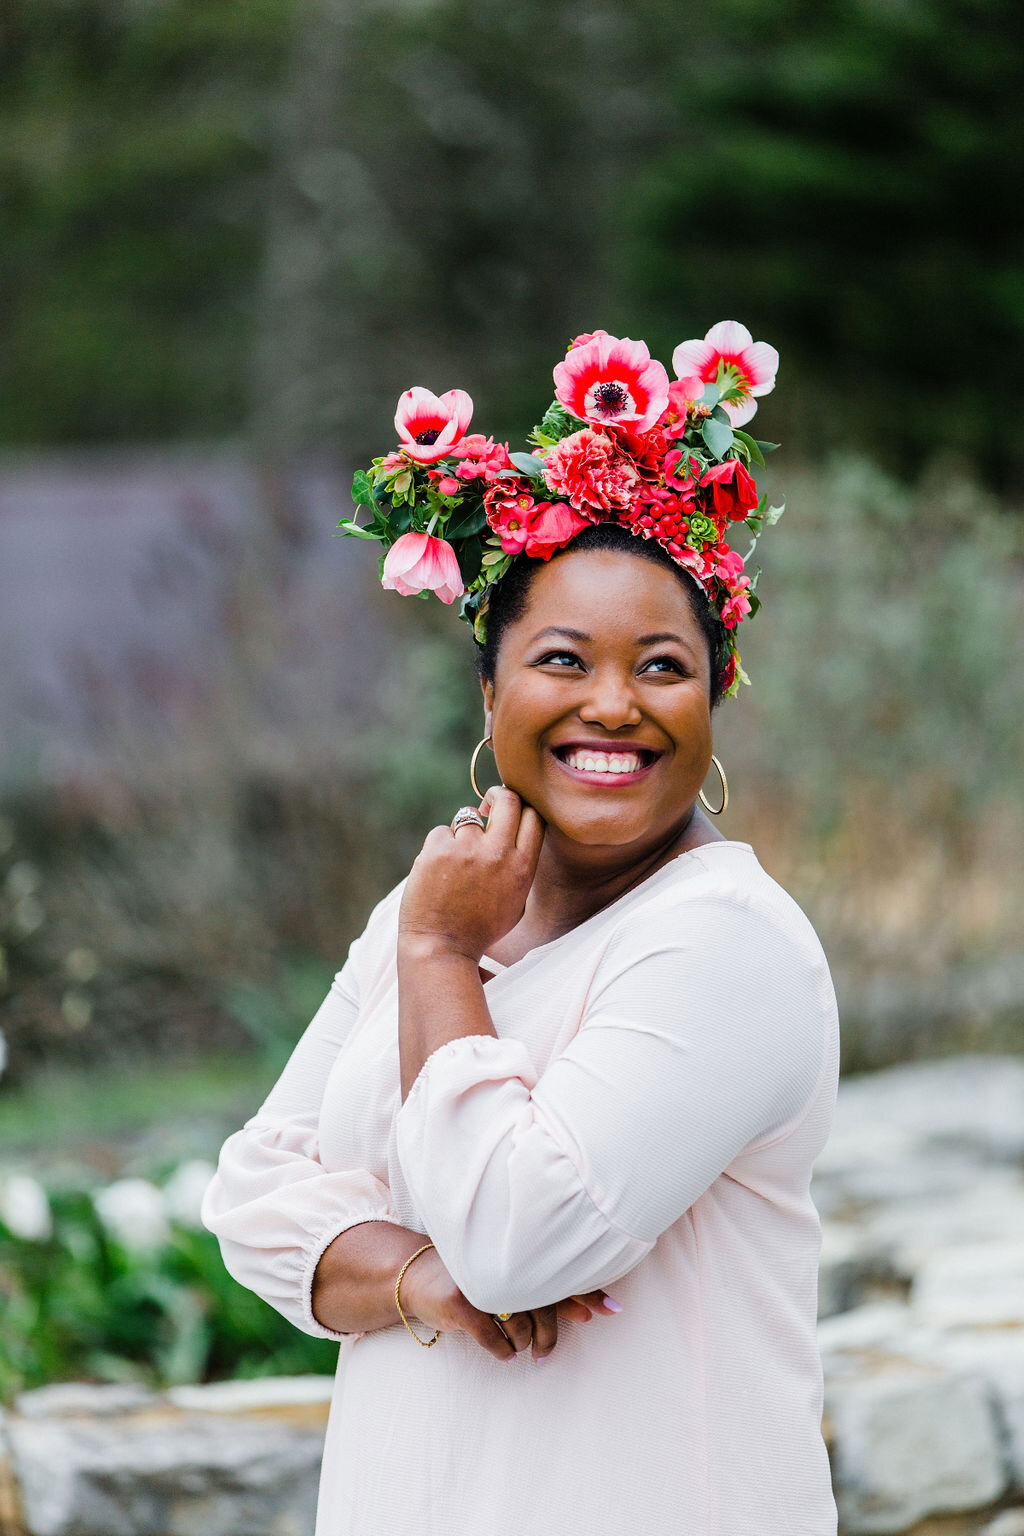 FLORAL CROWNS AND CUSTOM HAIRPIECES — Florals By Kimberly